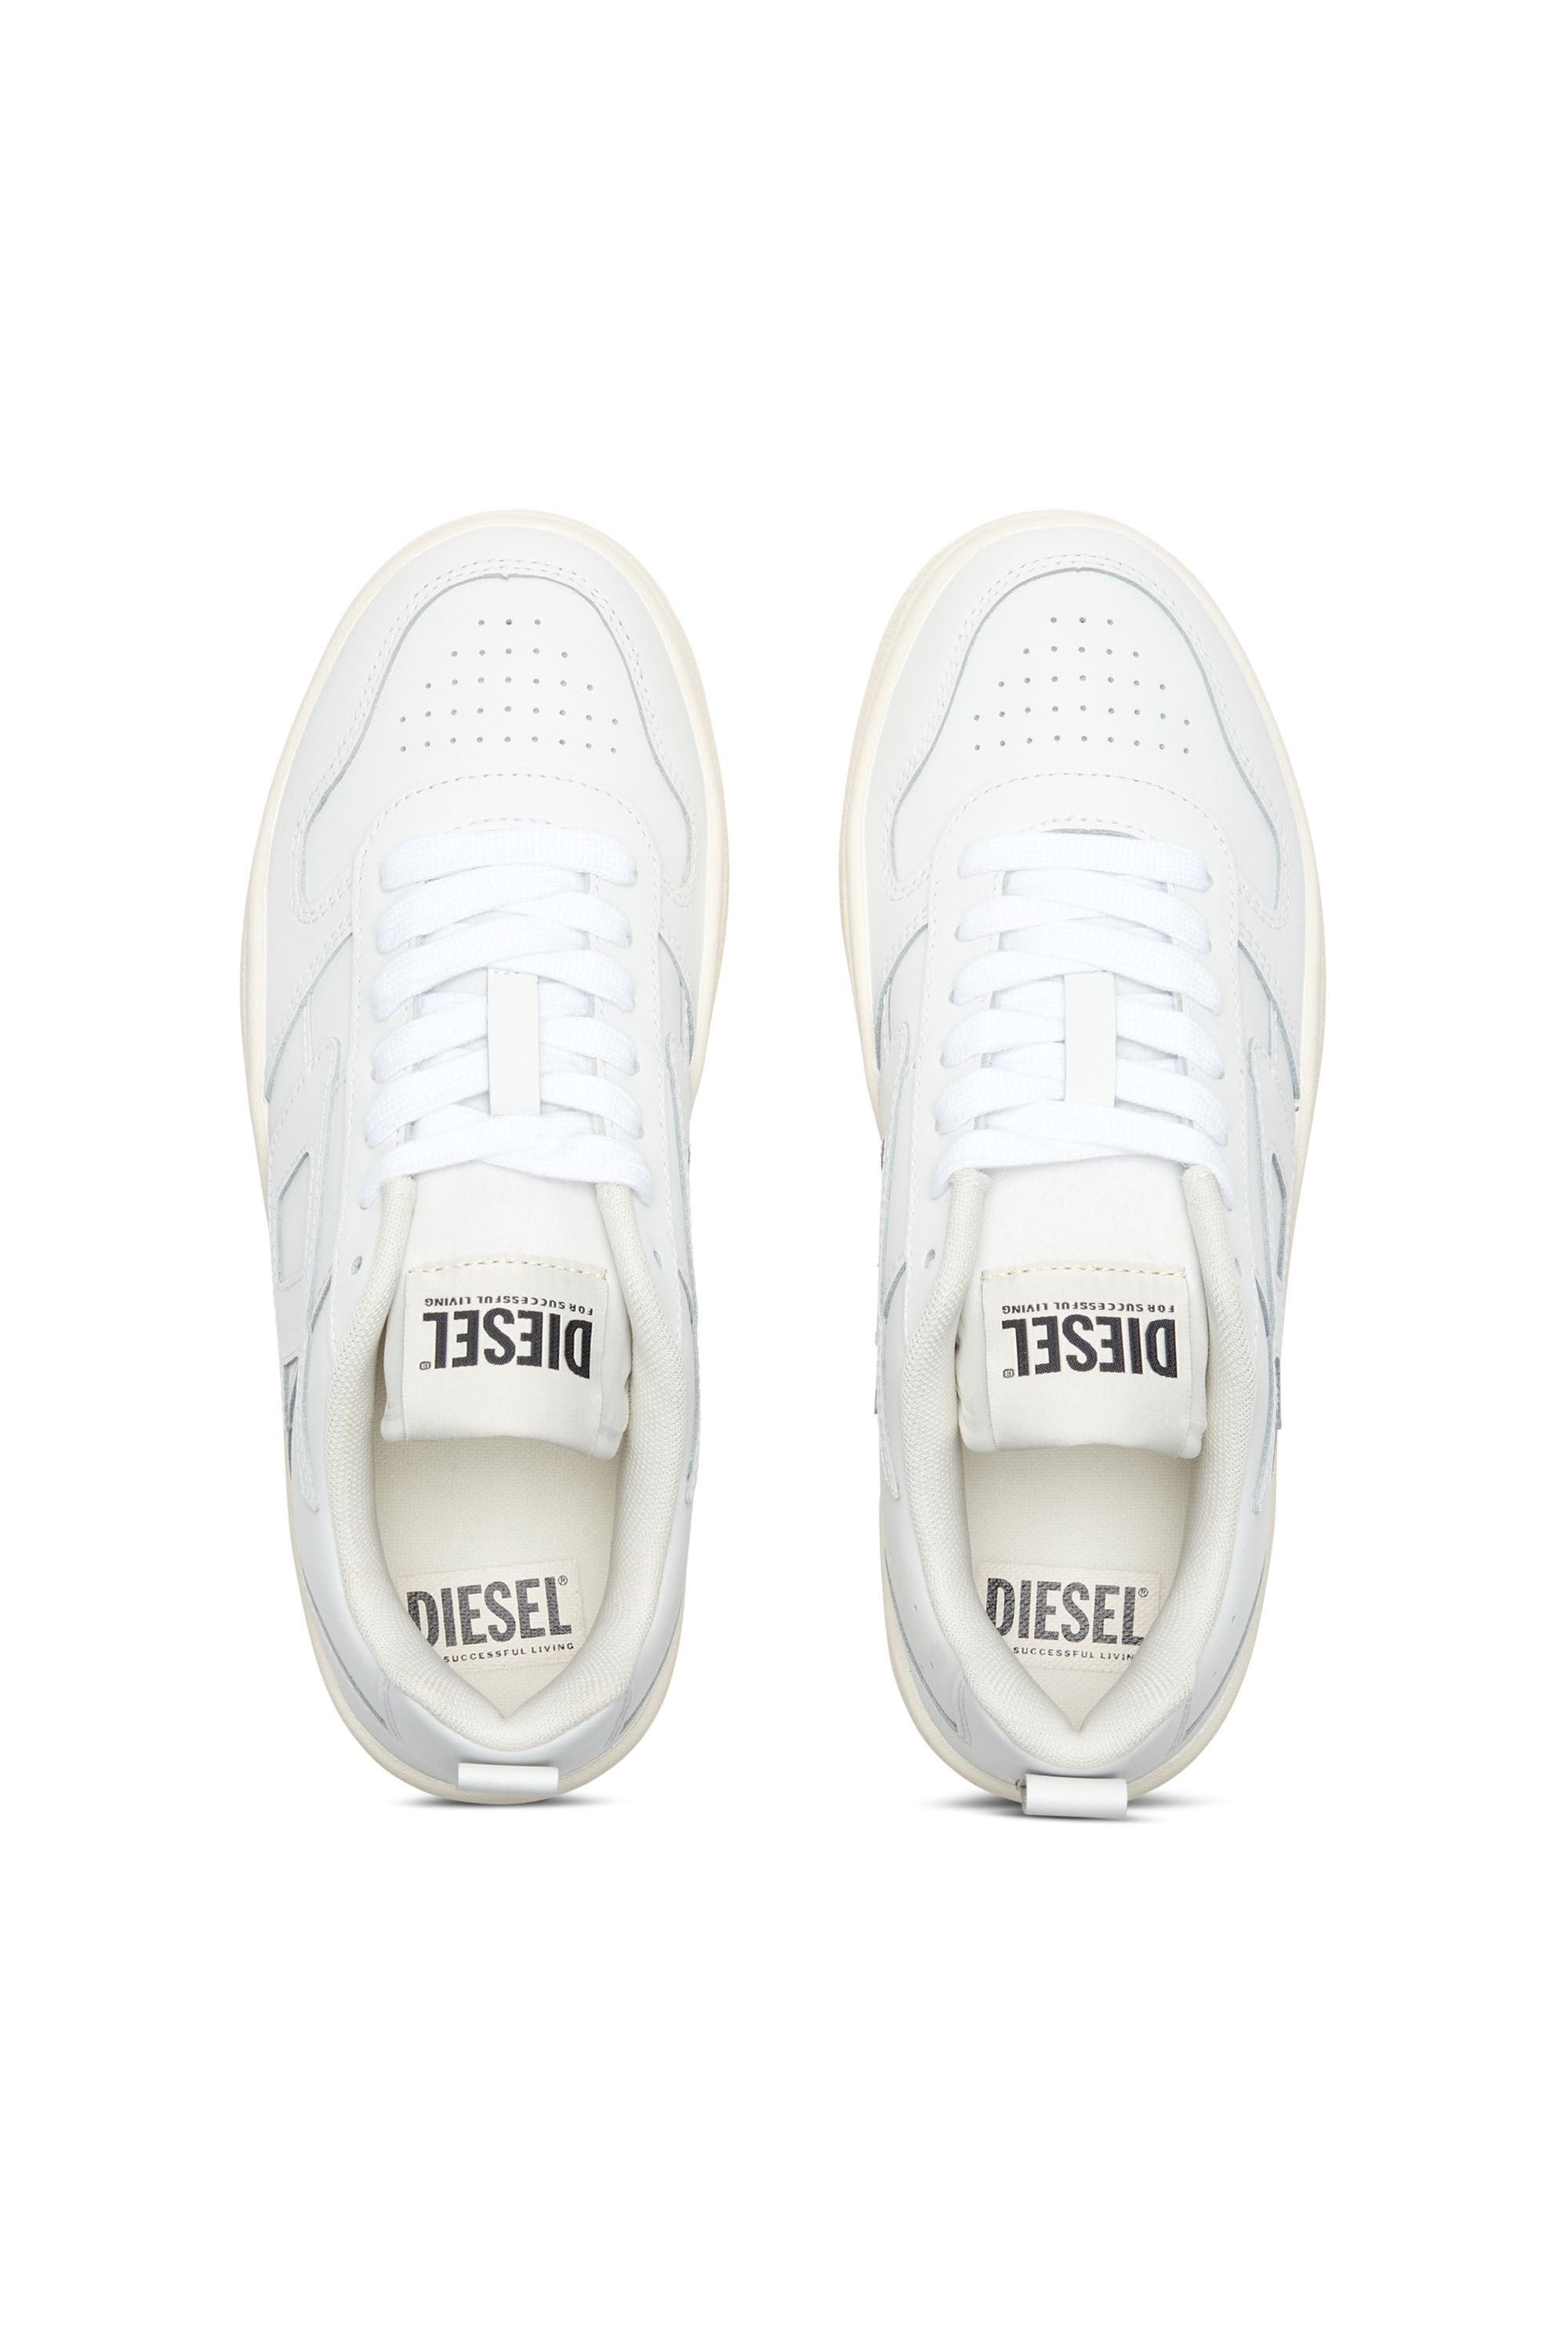 Diesel - S-UKIYO V2 LOW W, Woman S-Ukiyo Low-Low-top sneakers in leather and nylon in White - Image 4